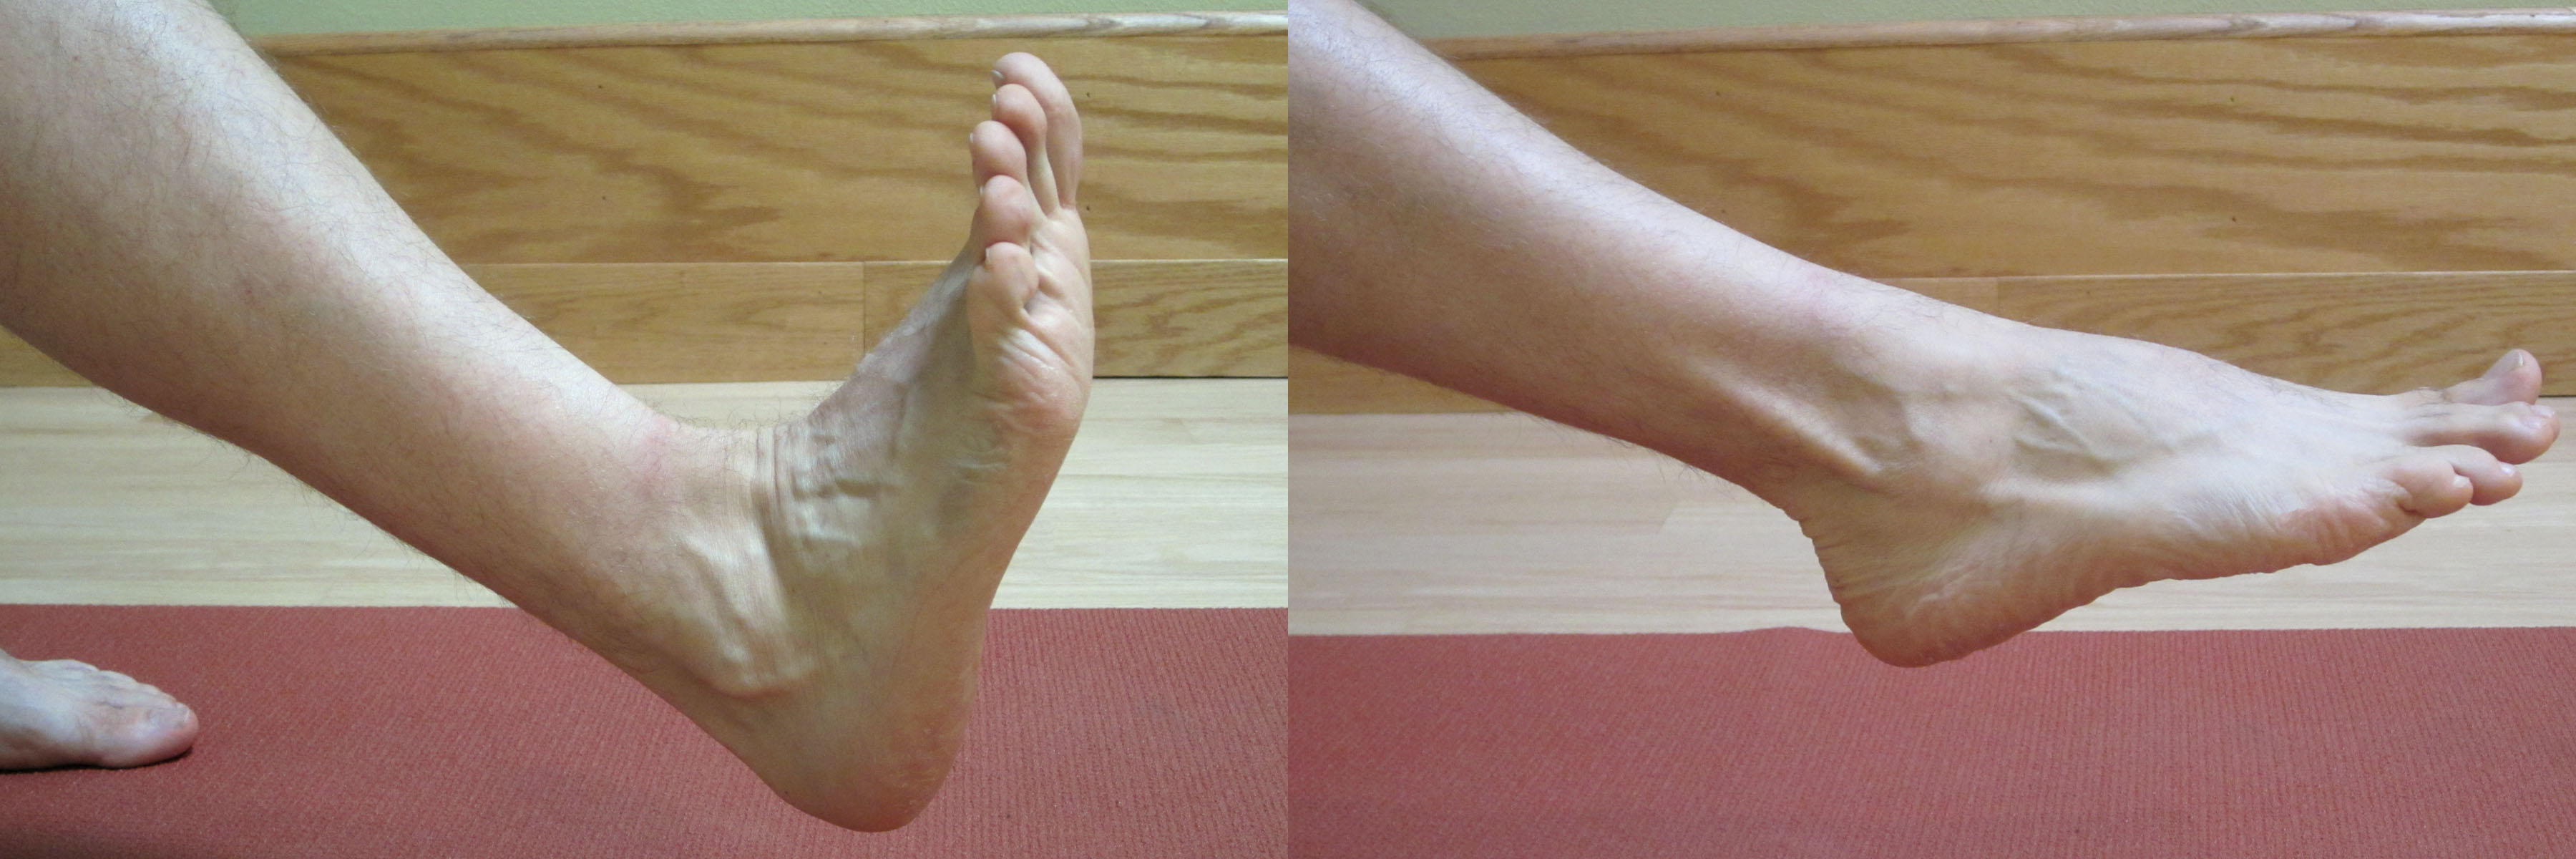 Physical Therapy for Ankle Sprains - Jaco Rehab